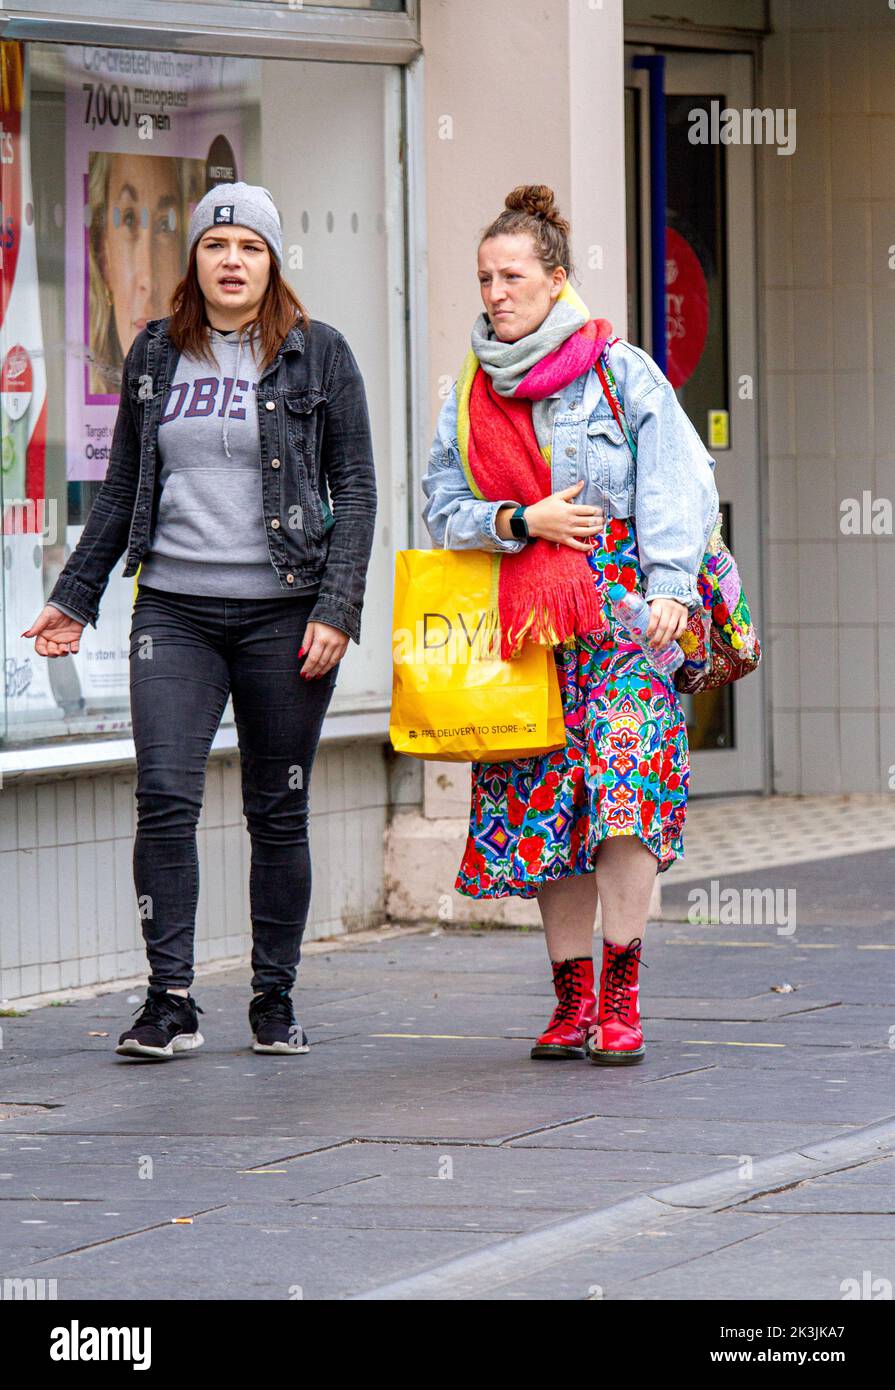 Dundee, Tayside, Scotland, UK. 27th Sep, 2022. UK Weather: Temperatures in some parts of Northeast Scotland reached 12°C on this bitterly cold Autumn day. Local trendy women are out and about shopping in Dundee city centre in late September, albeit cautiously due to the high cost of living. Credit: Dundee Photographics/Alamy Live News Stock Photo